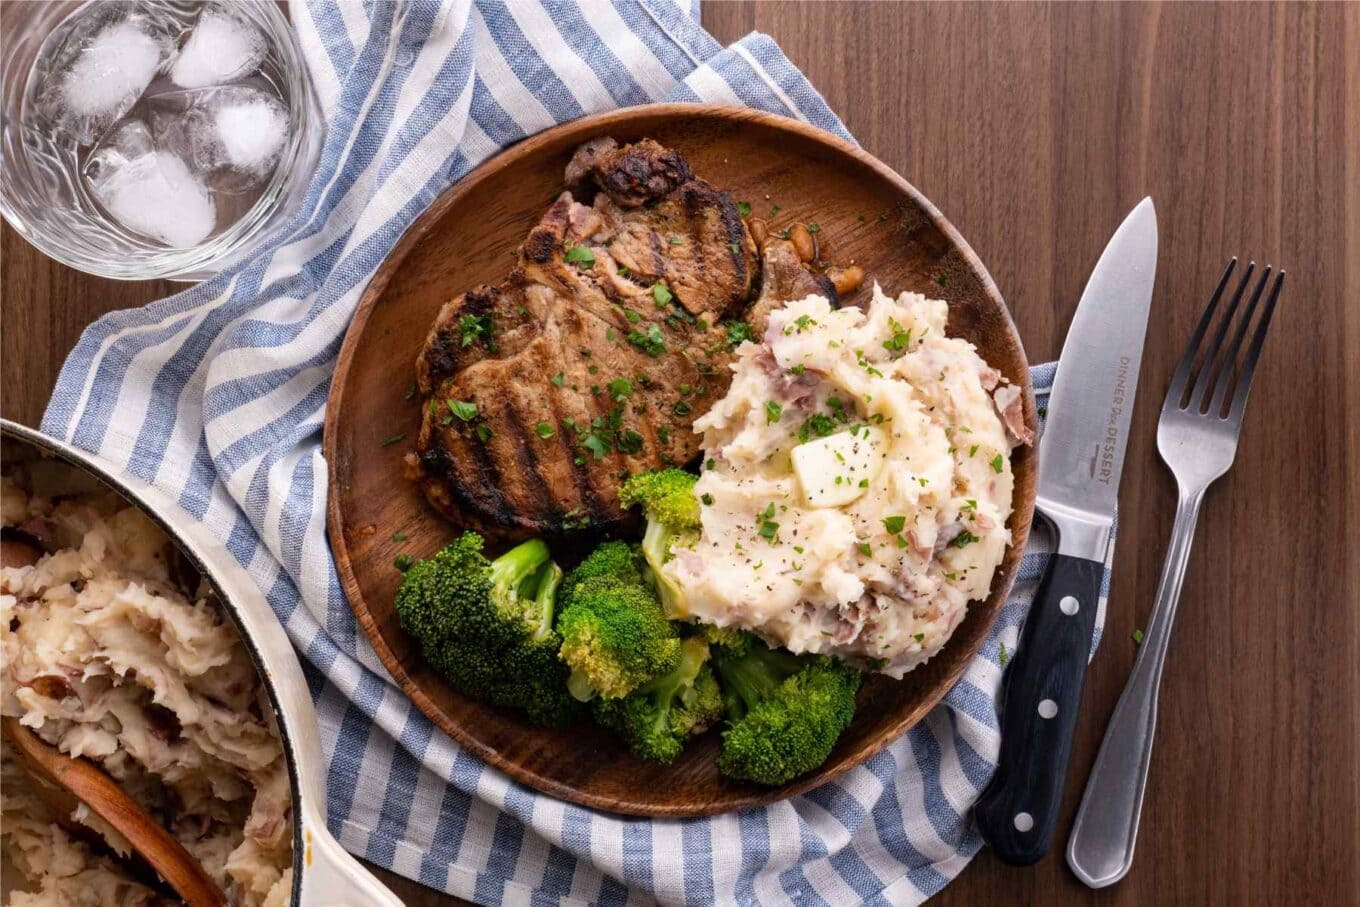 Creamy Garlic Mashed Potatoes on plate with steak and broccoli